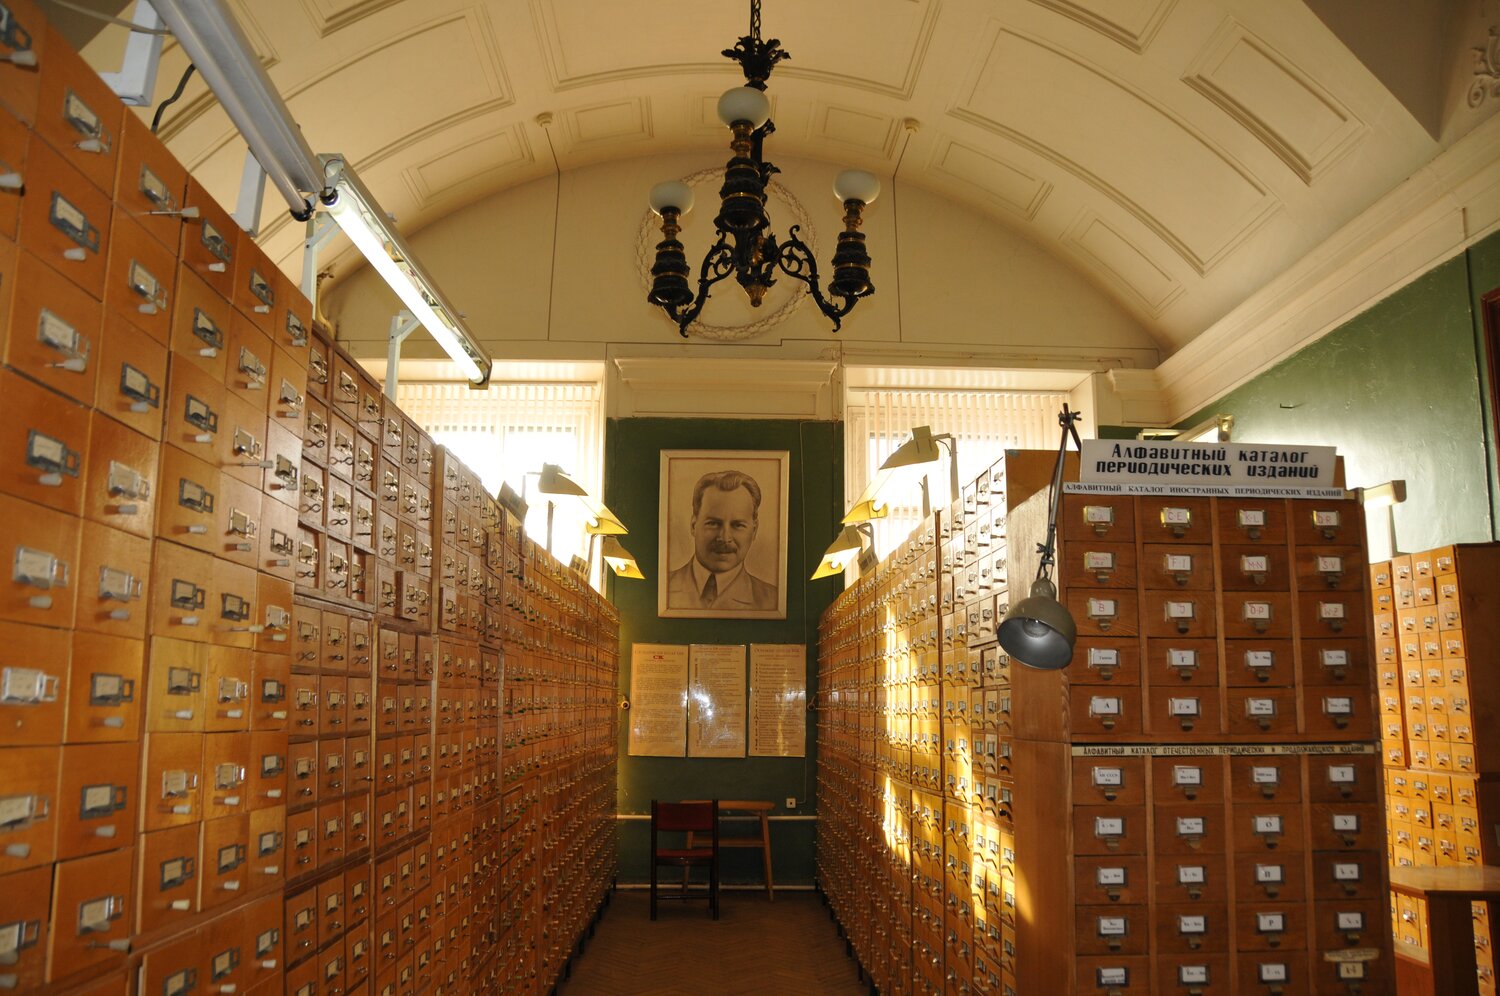 One of the rooms of VIR scientific library. In 2018, the library will be 180 years old. 